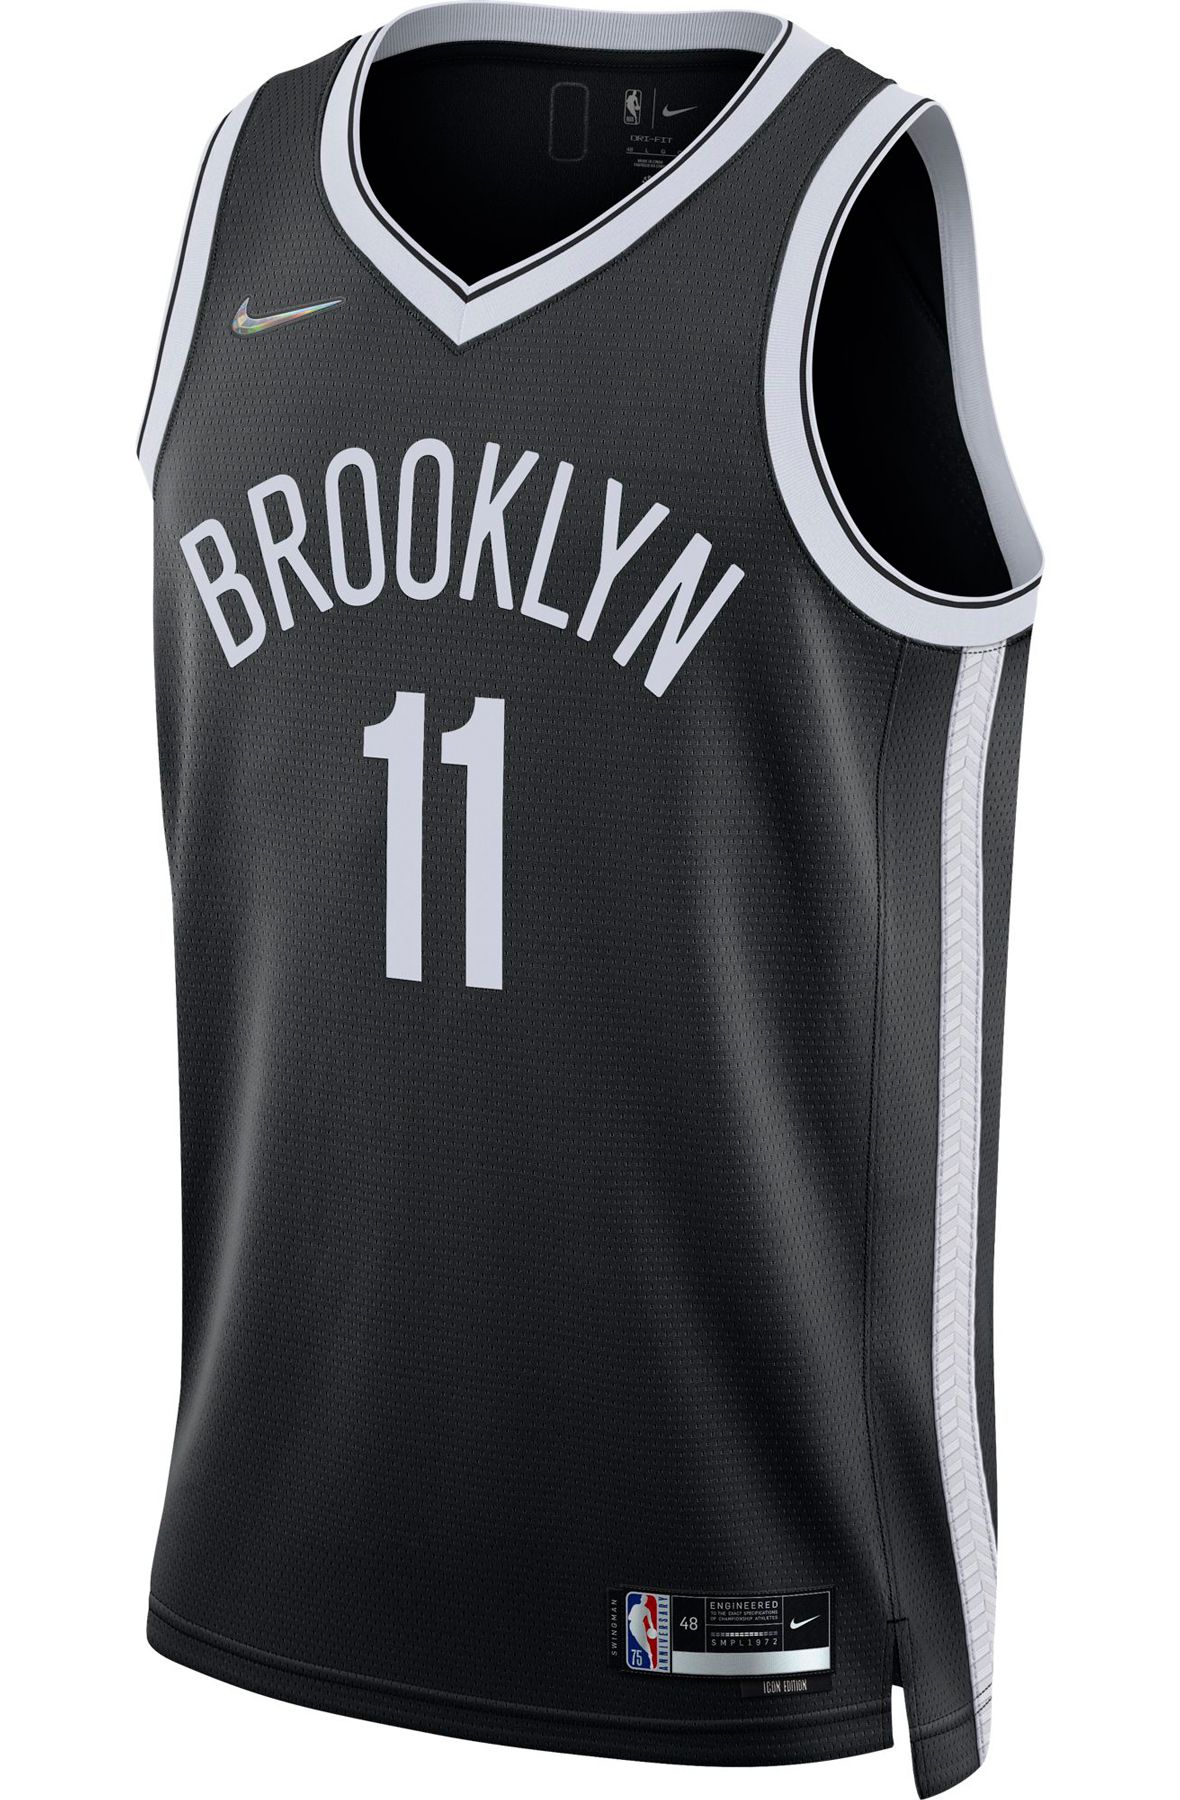 Kyrie Irving - Brooklyn Basketball Jersey Graphic T-Shirt for